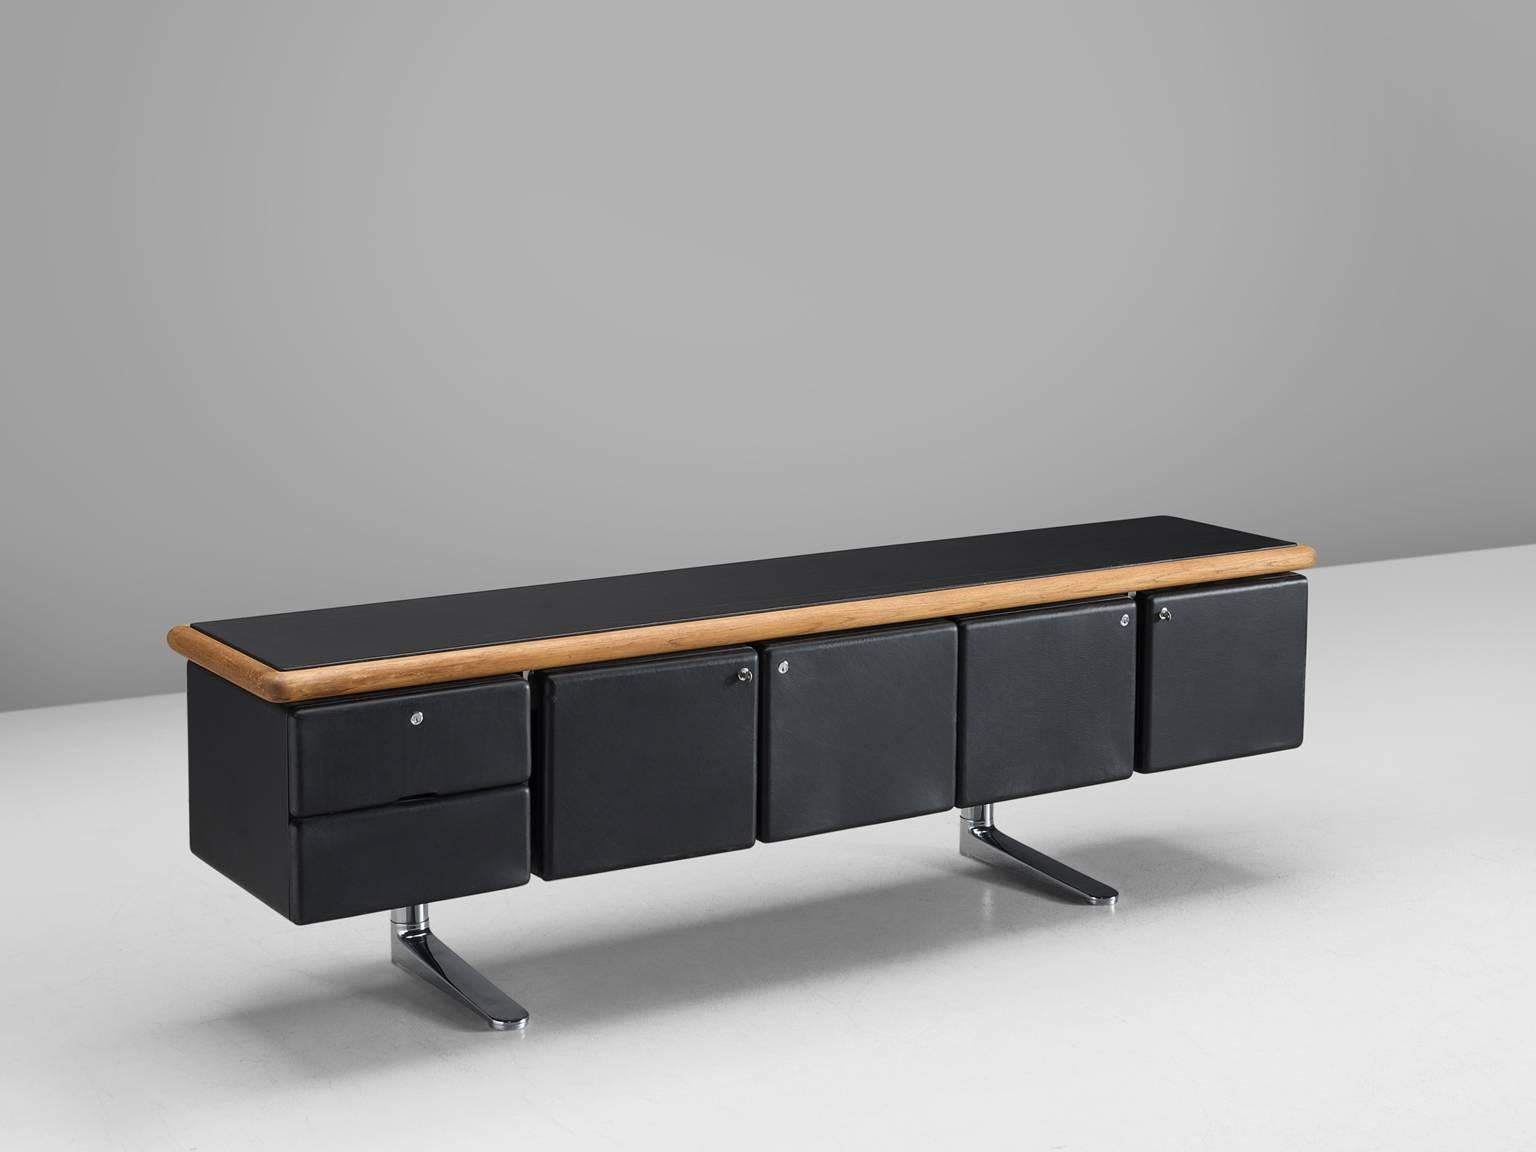 Warren Platner, executive sideboard for Knoll, United States, 1973.

This heavy, sturdy credenza is designed by the American modernist Warren Platner. He is most known for his airy metal, sculptural lounge chairs. Perhaps it is surprising that